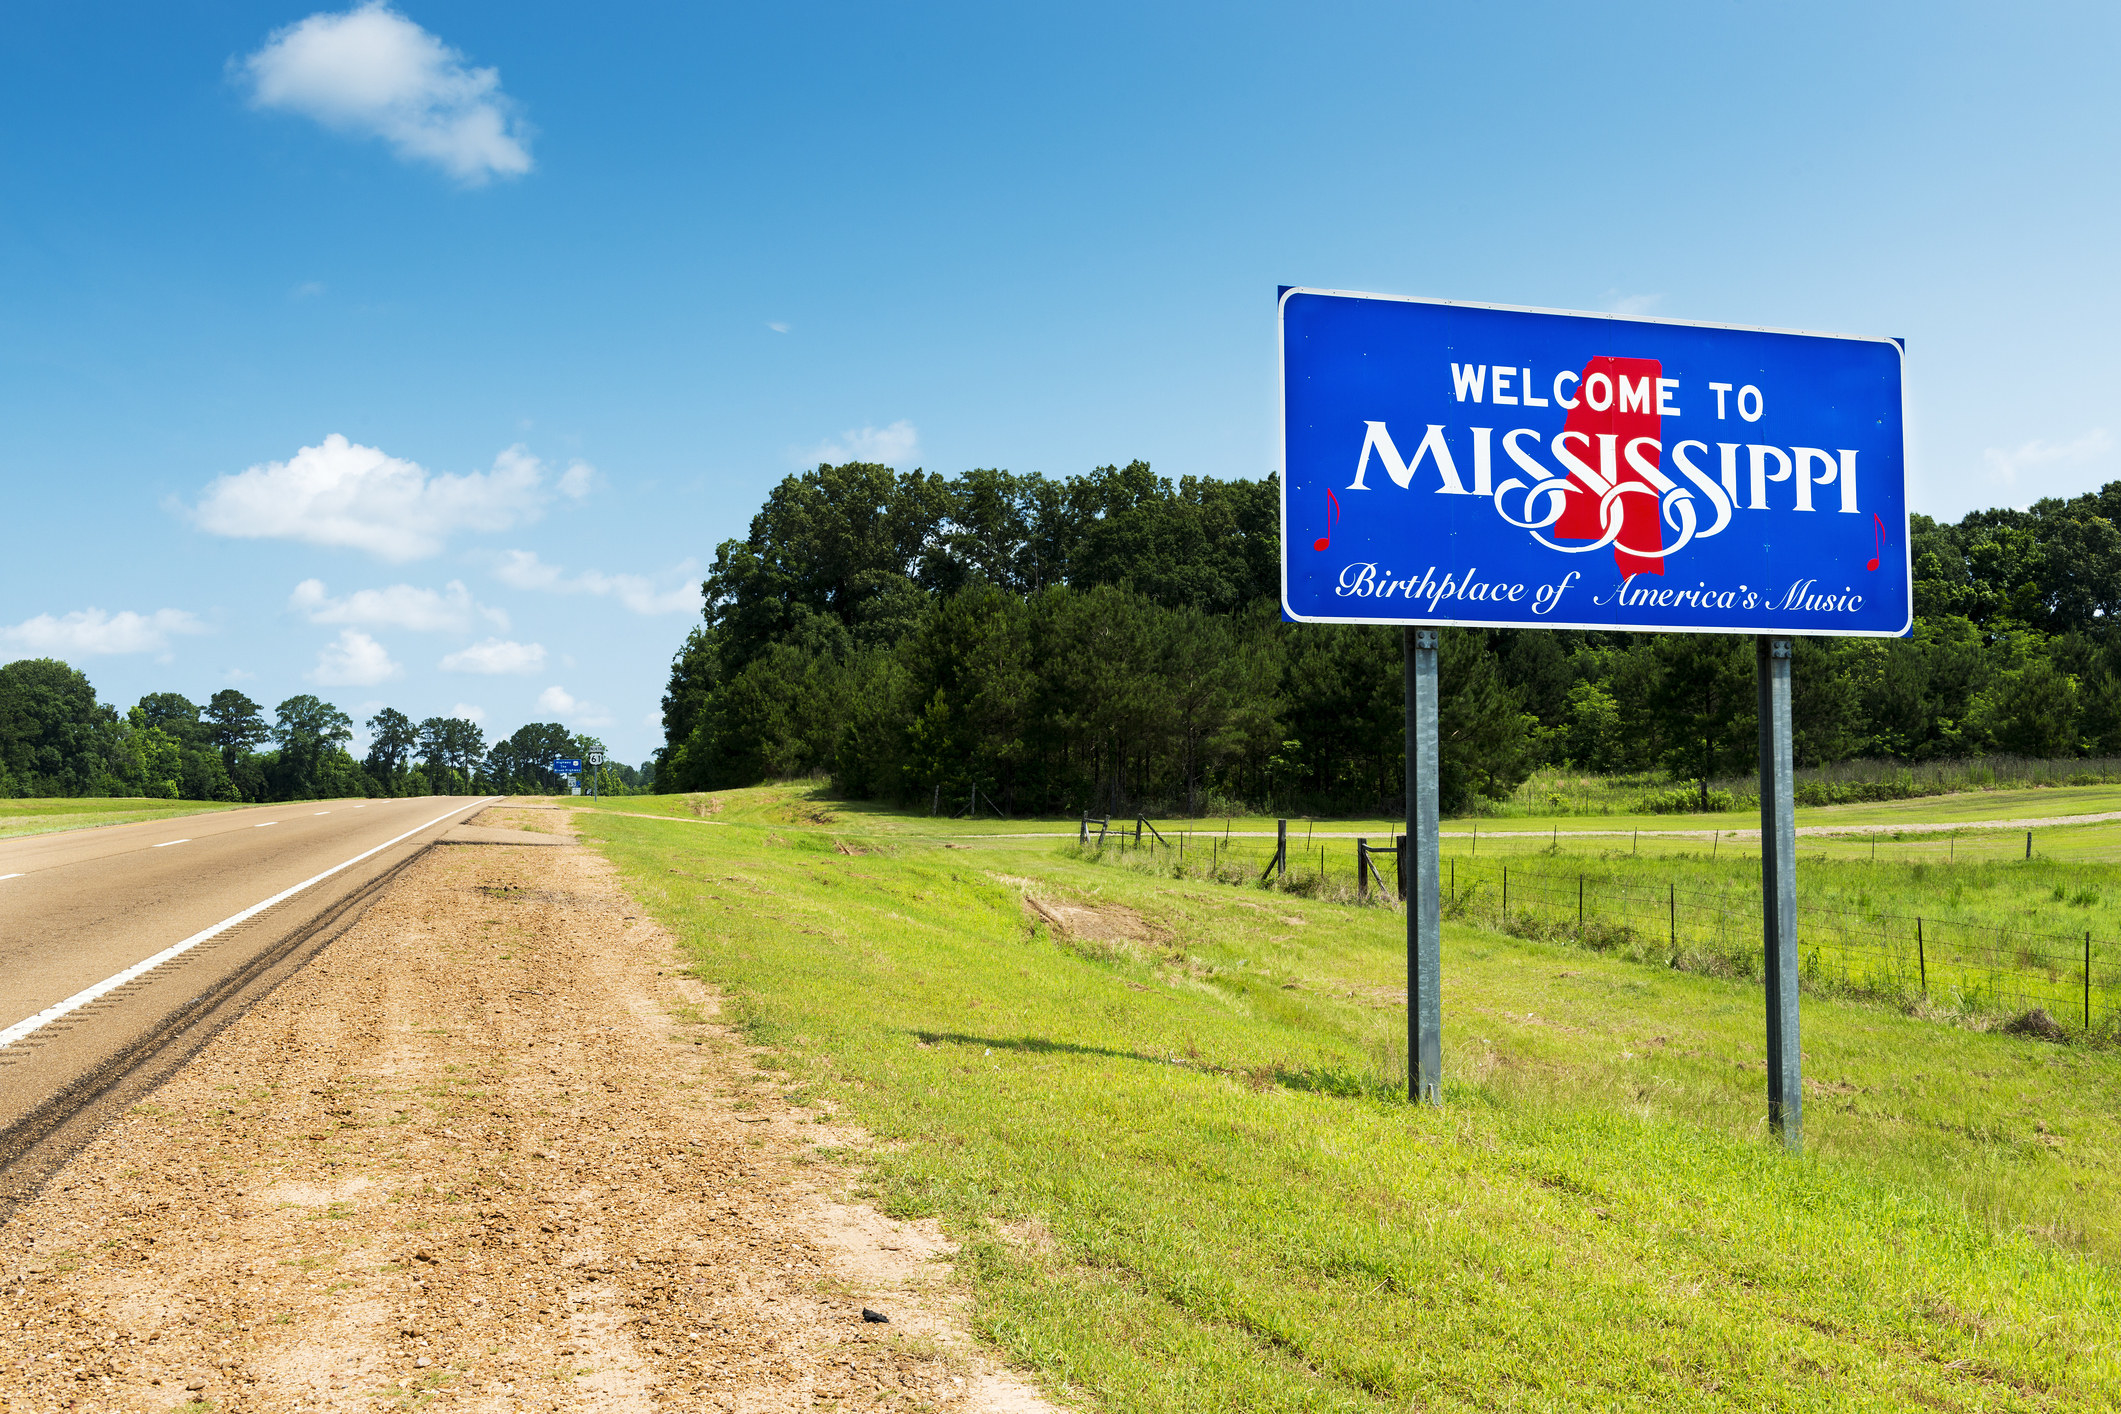 Mississippi State welcome sign along a highway